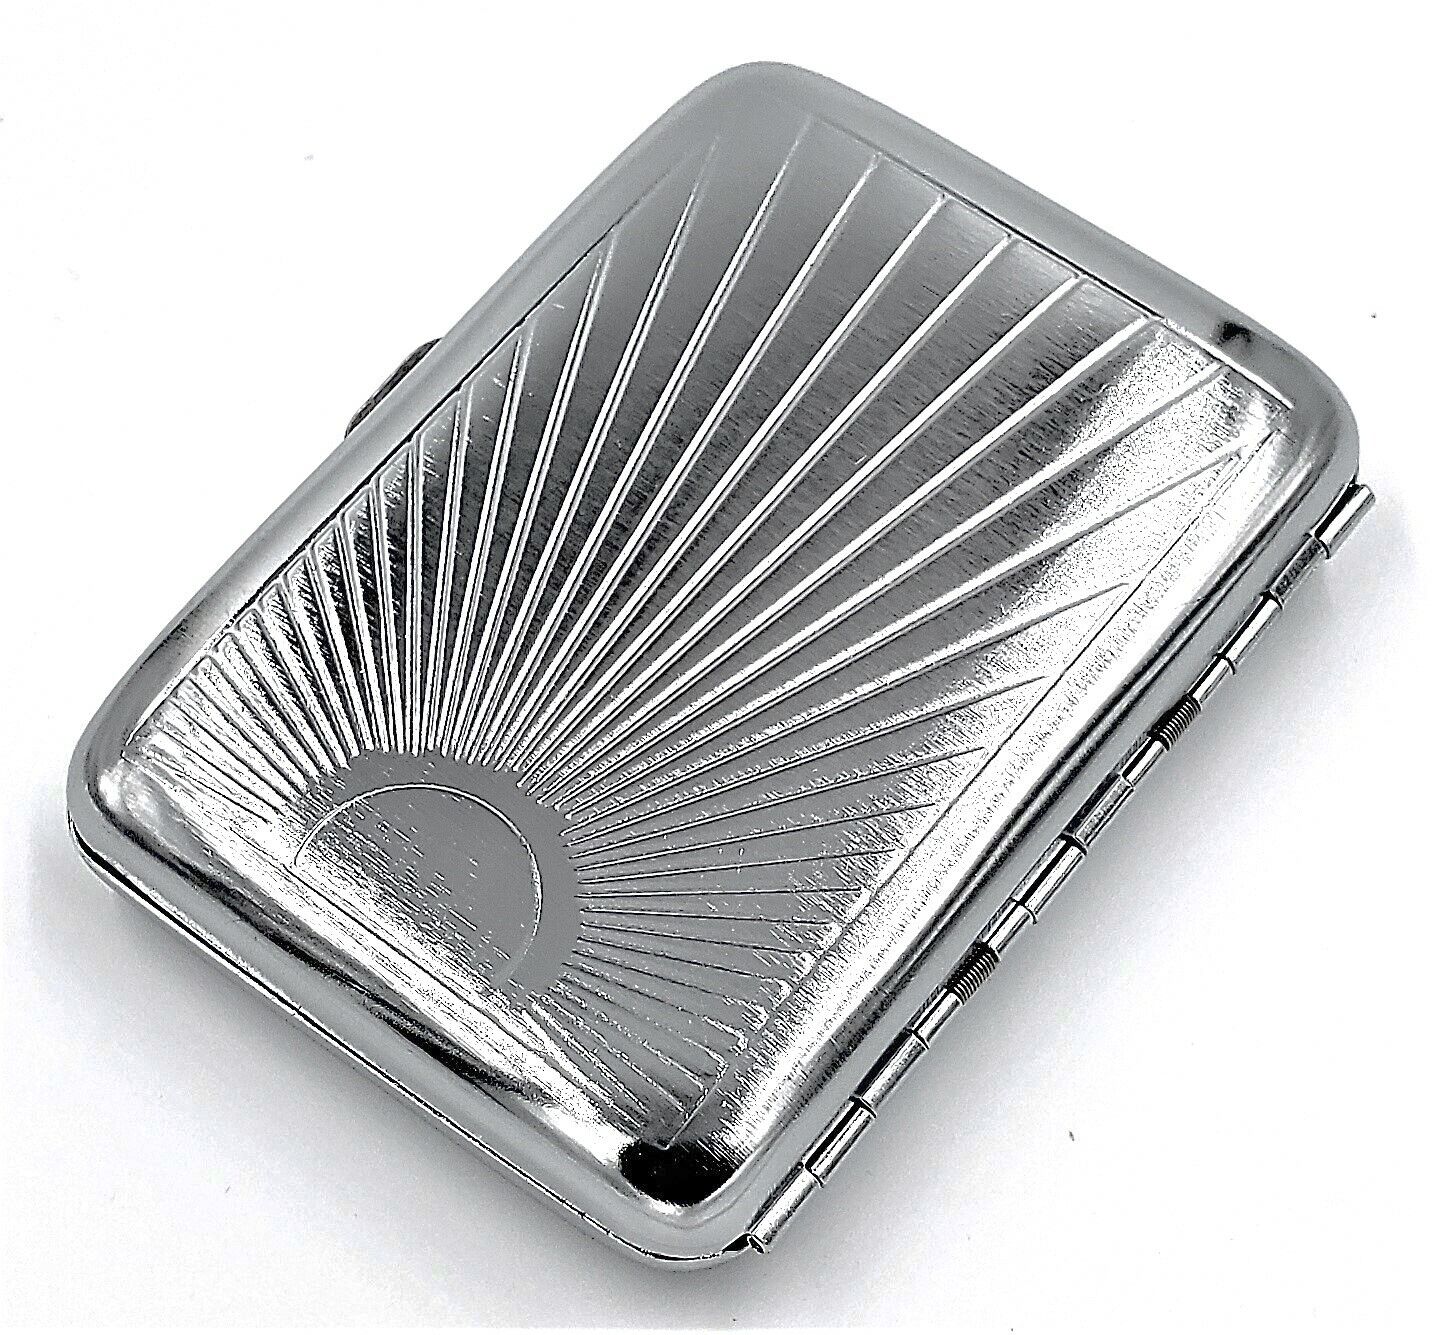 Classic Metallic Silver Color Double Sided King Cigarette Case Ray design